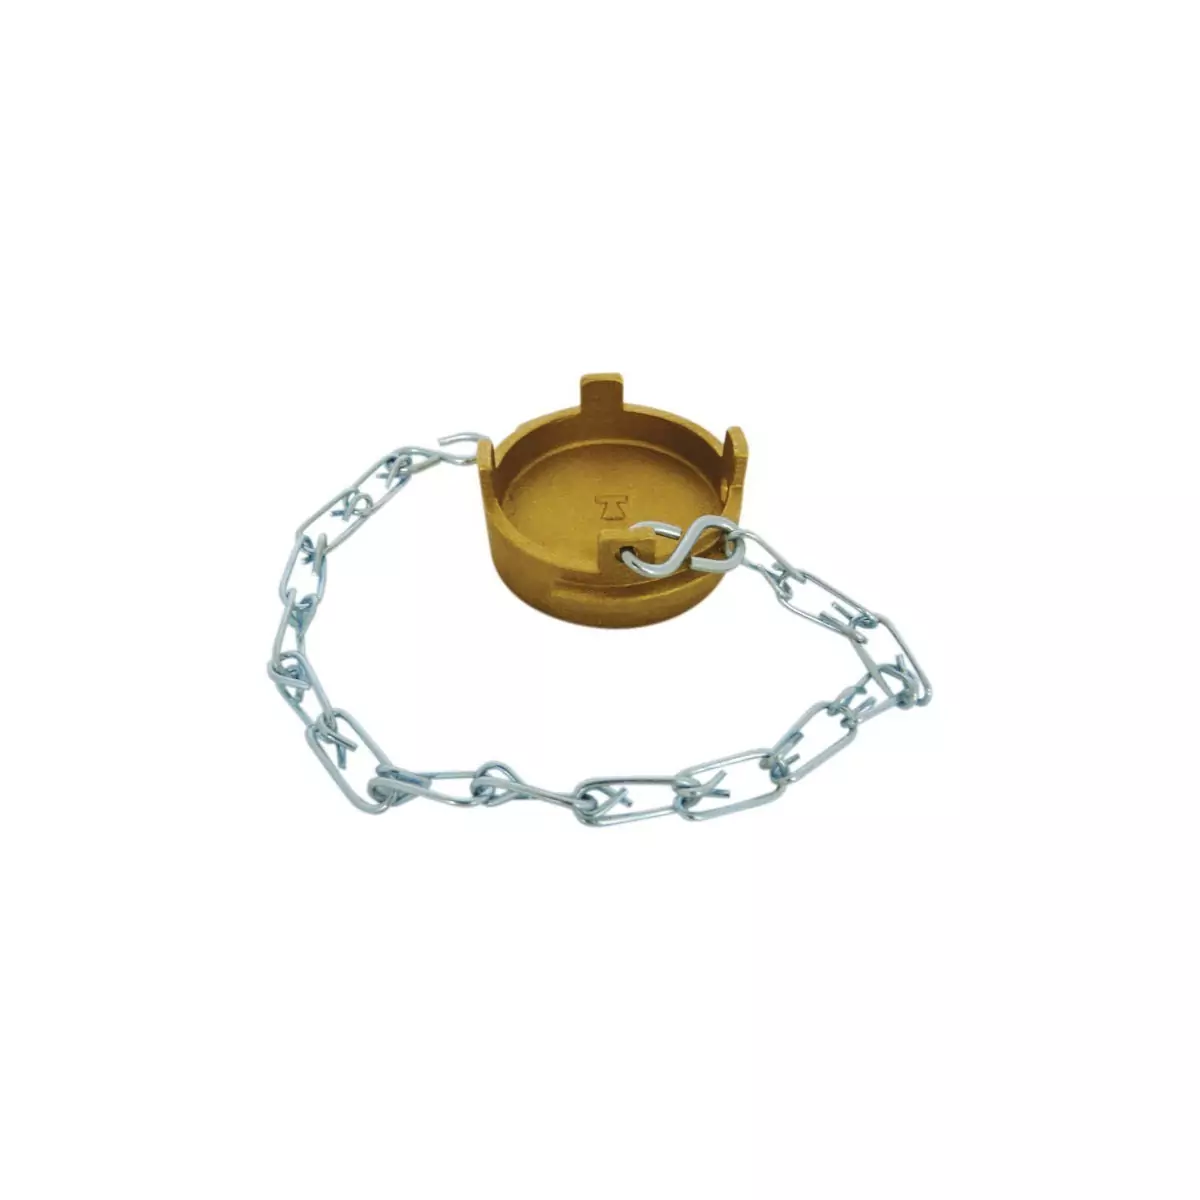 Symmetrical cap Guillemin dish type padlockable irrigation with chain in copper alloys